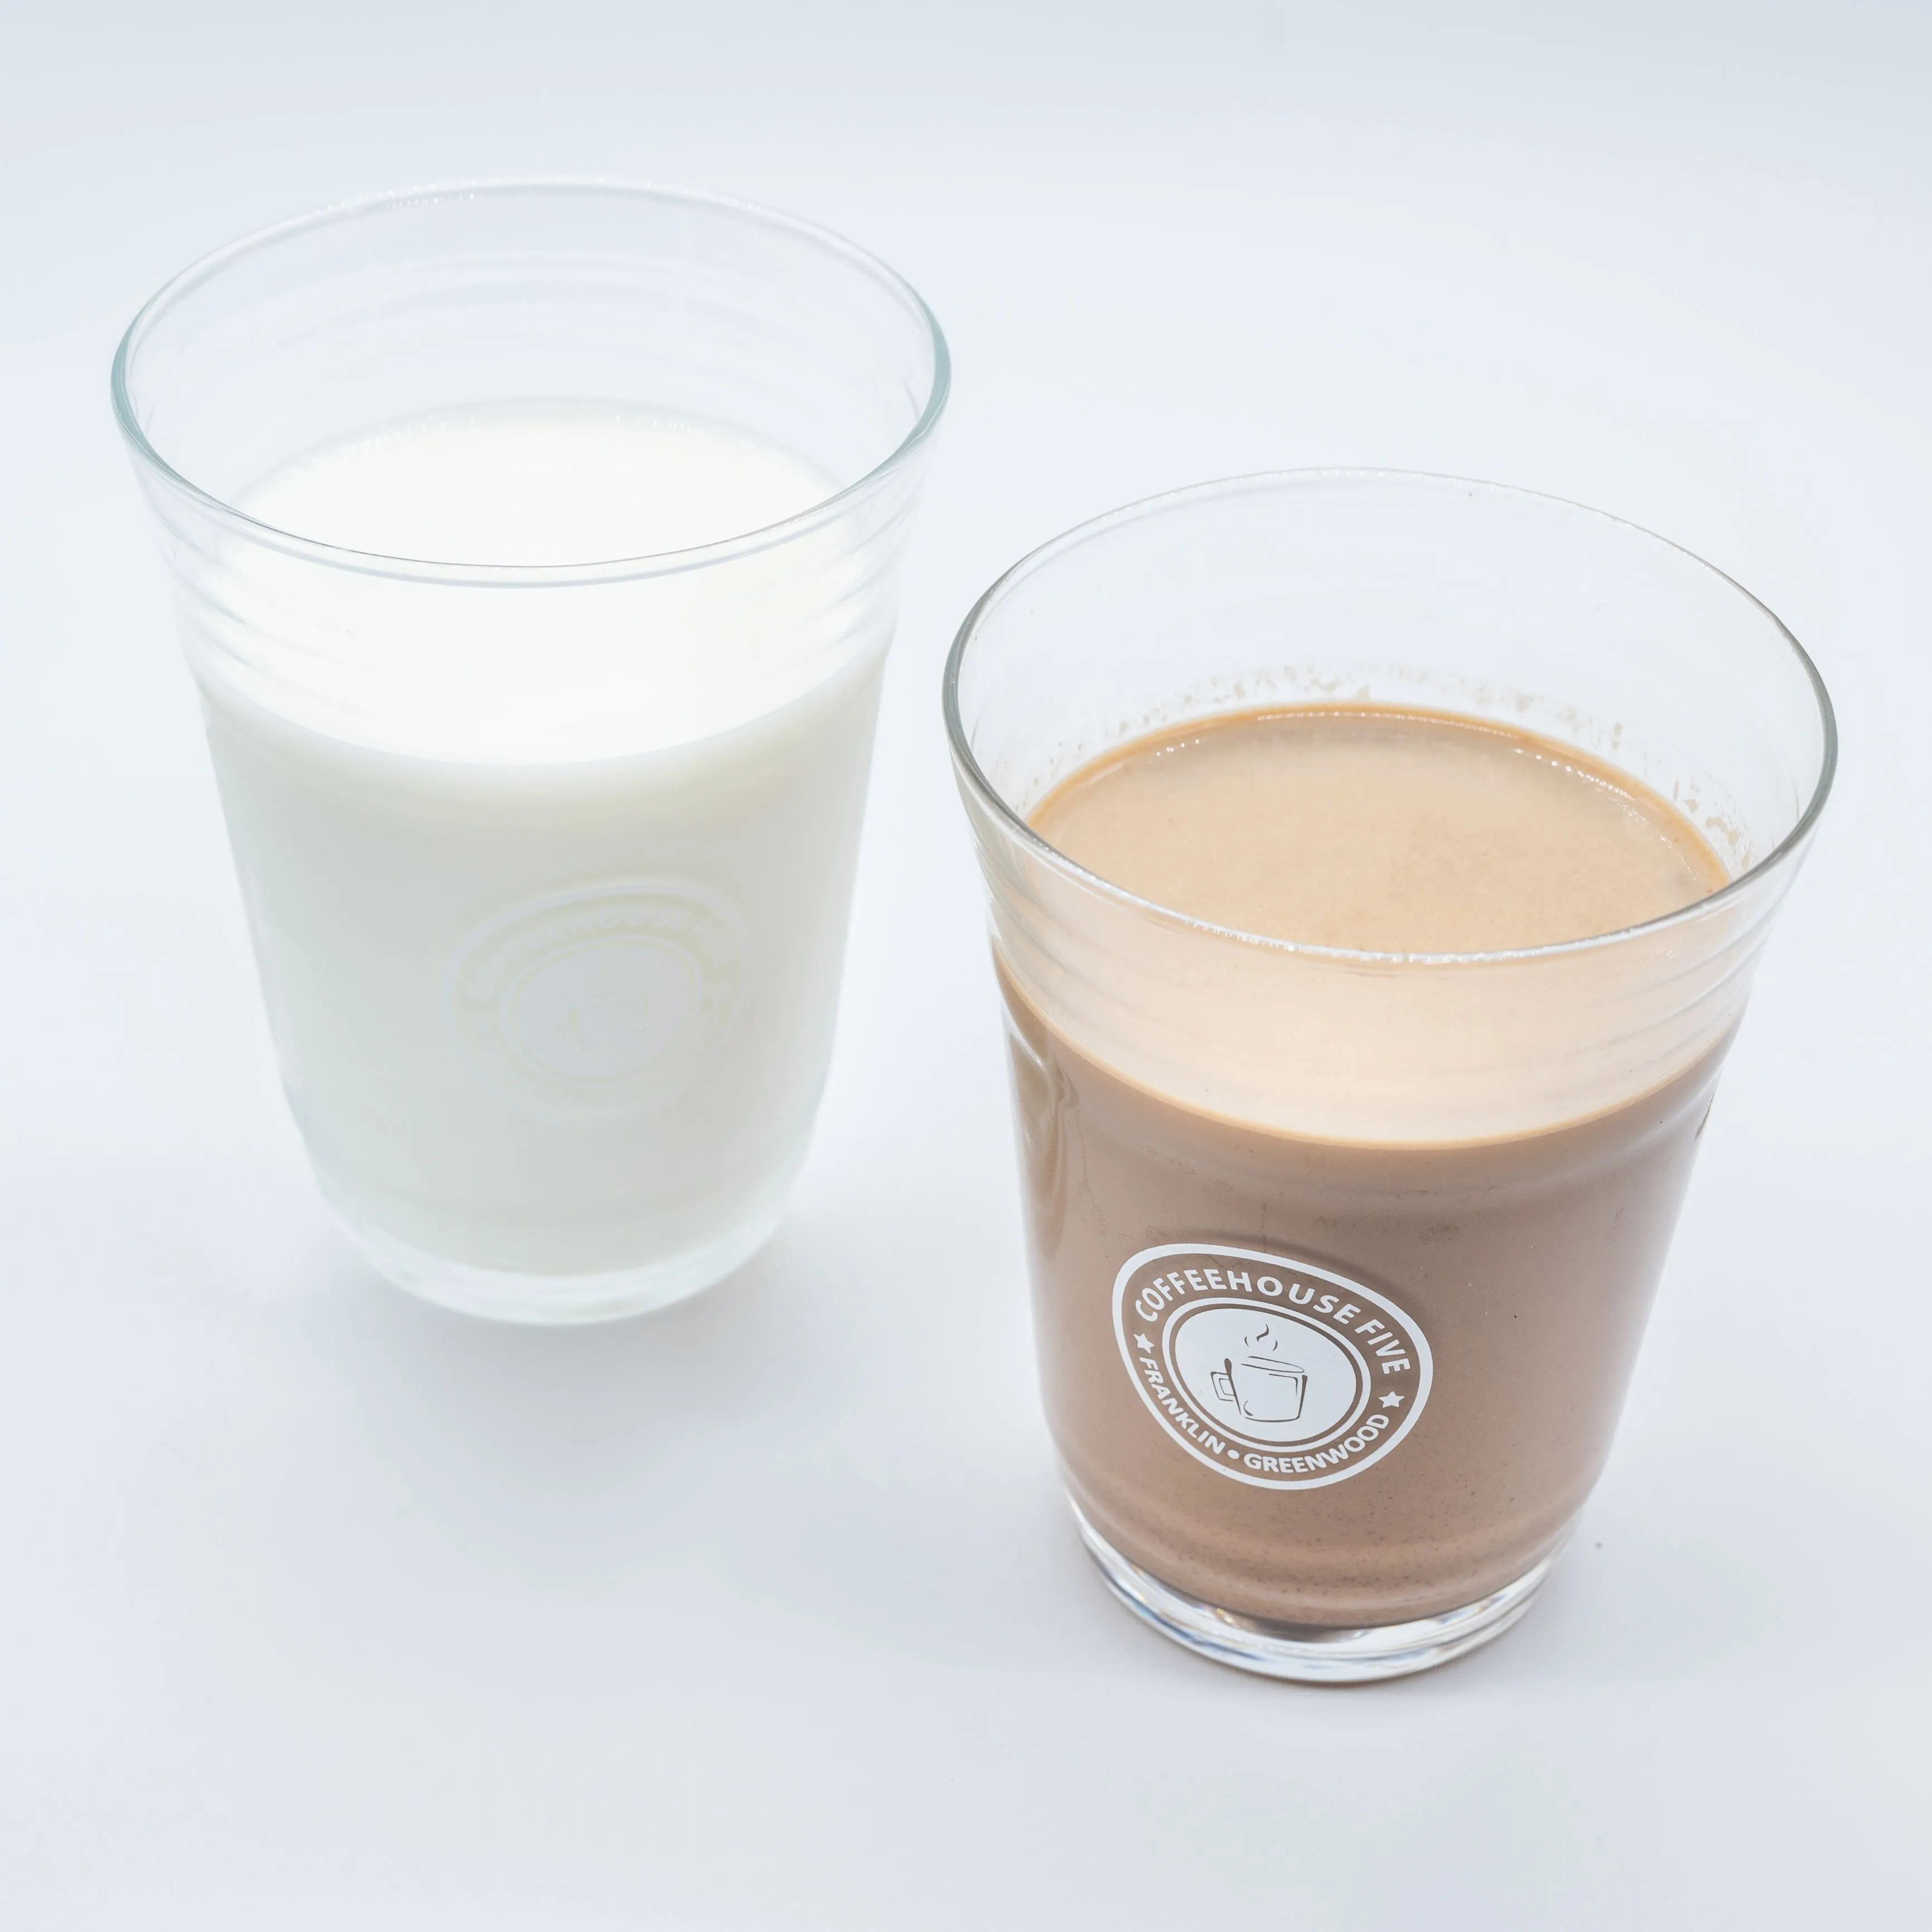 Two glasses on a white surface, one with milk and the other with a chocolate-flavored beverage, both with printed logos.